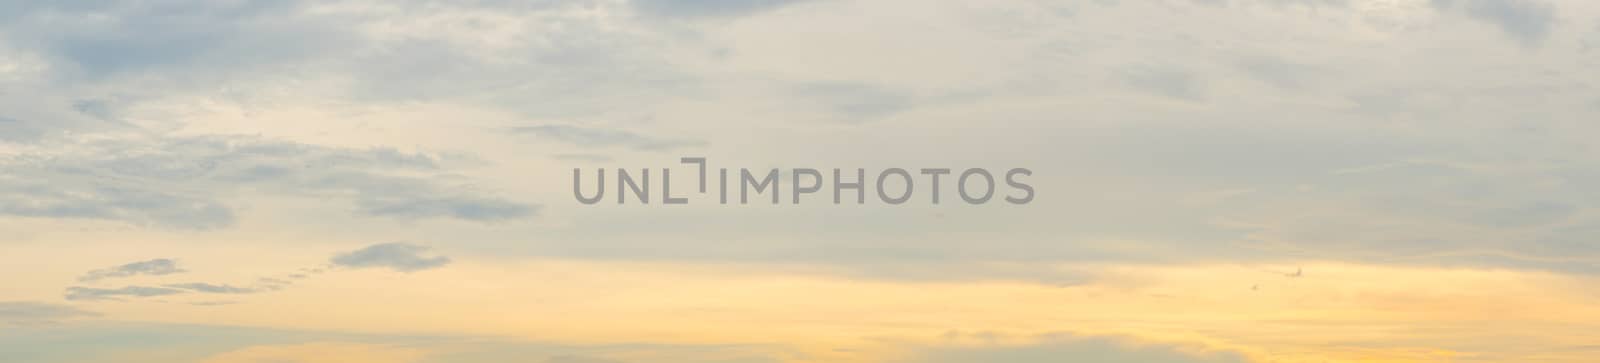 Panorama clear warm sky with white cloud background in the sunset time. warm light sky background.